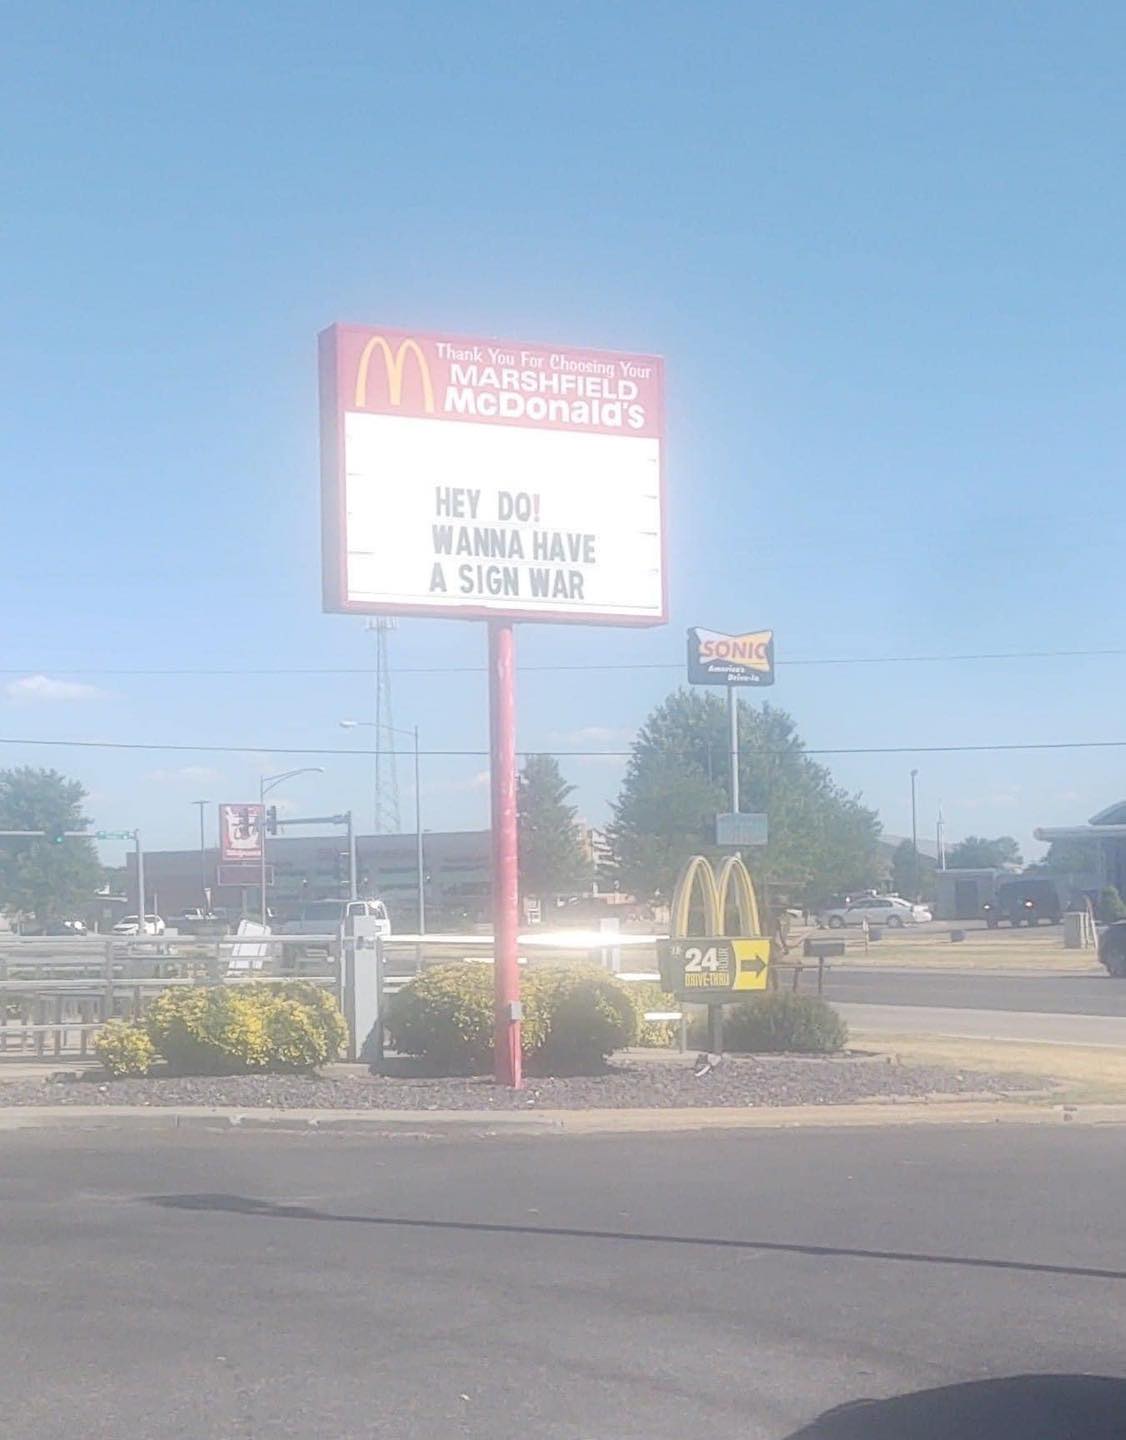 McDonald's sign that says "hey dq! wanna have a sign war"